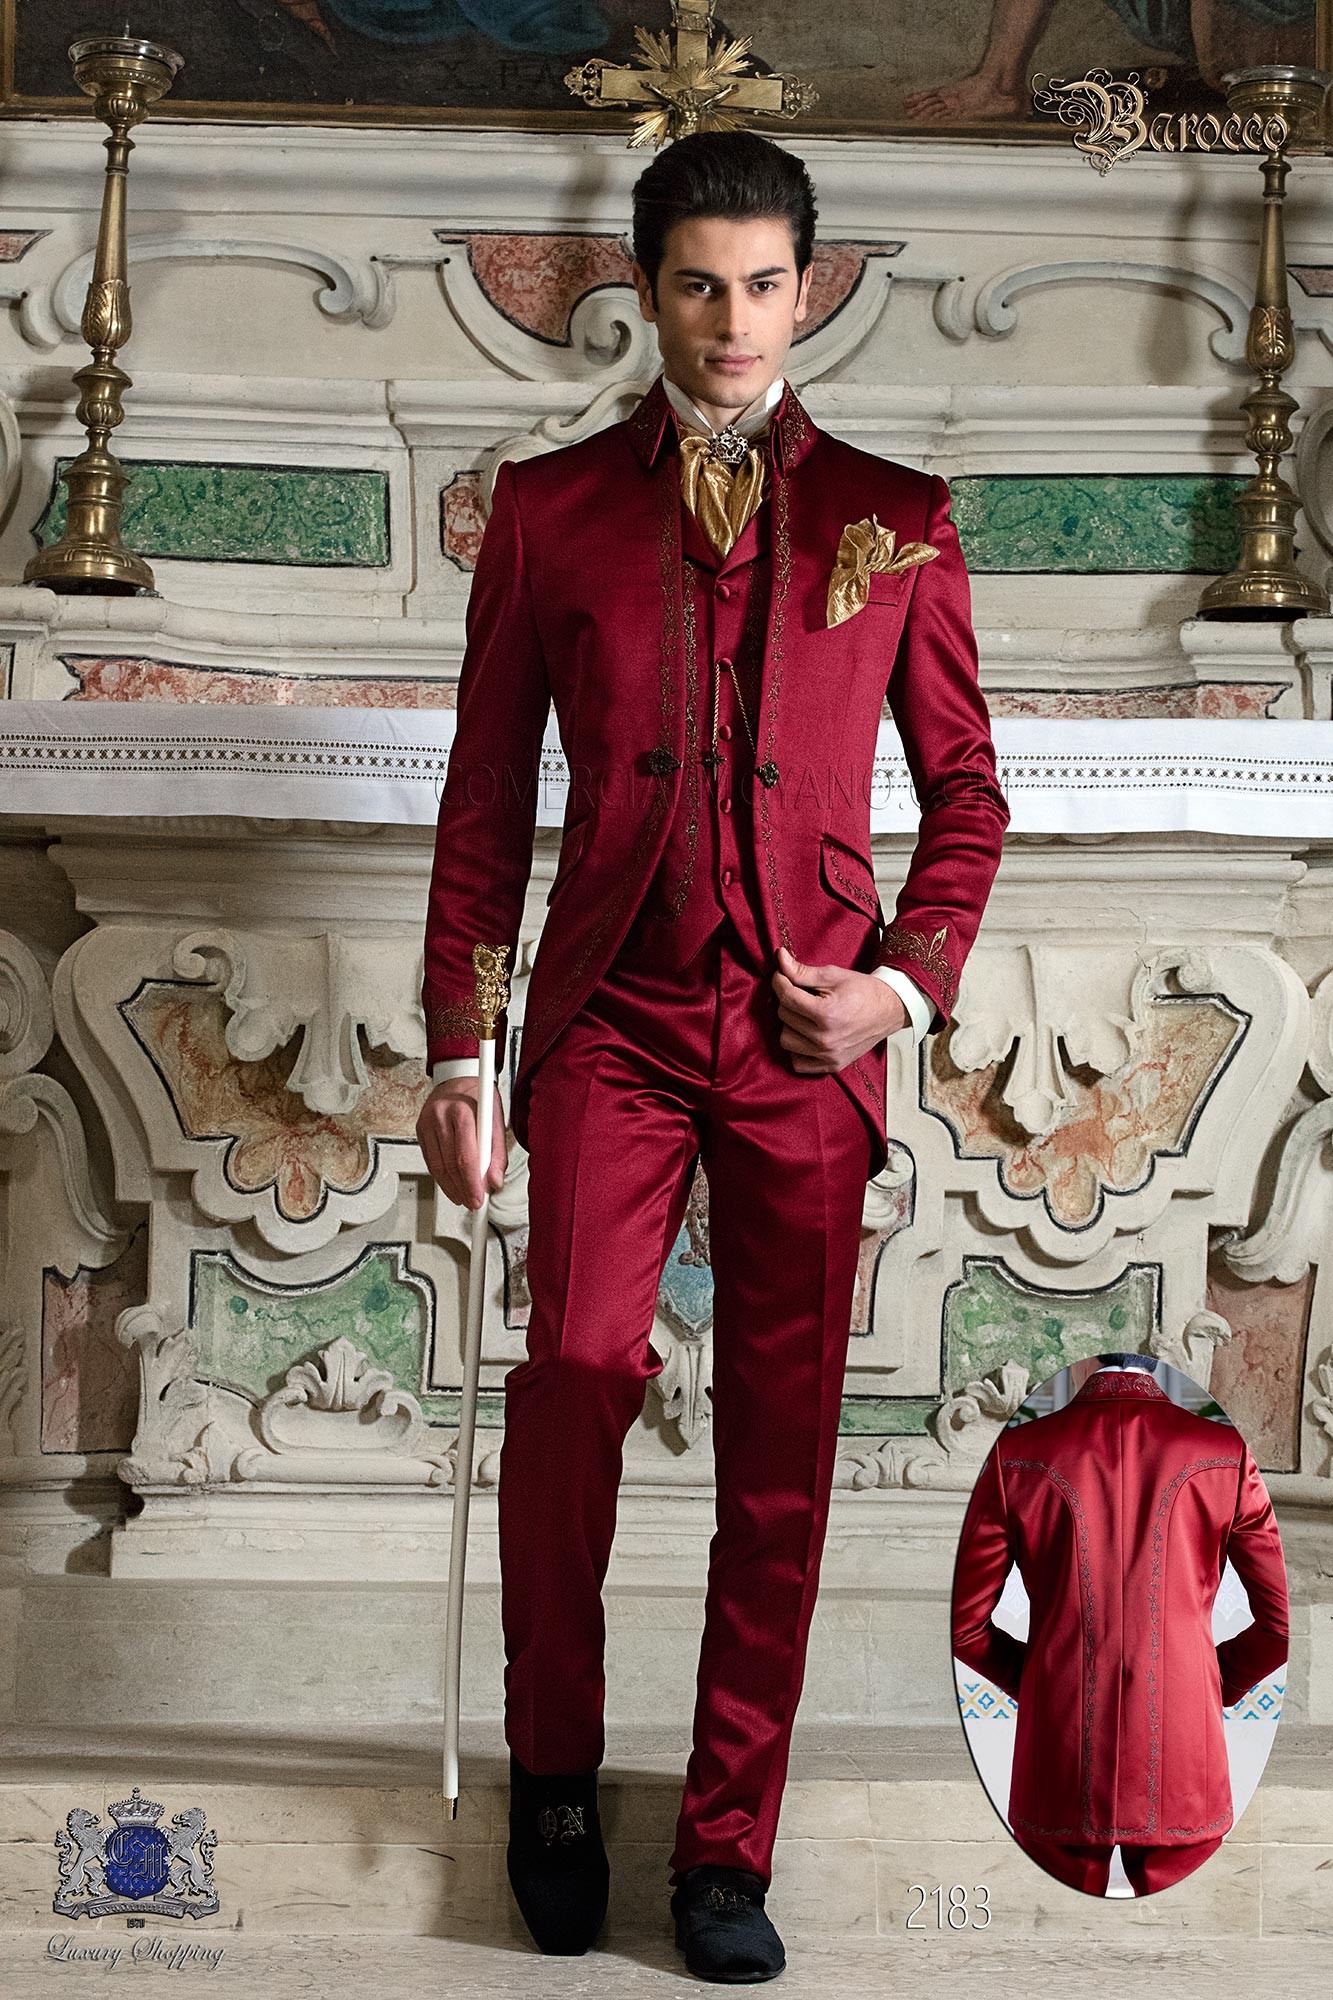 SUJET COMMUN || le bal de la nouvelle année  - Page 2 Groomswear-baroque-vintage-suit-jacket-in-red-satin-embroidered-with-gold-colored-yarns